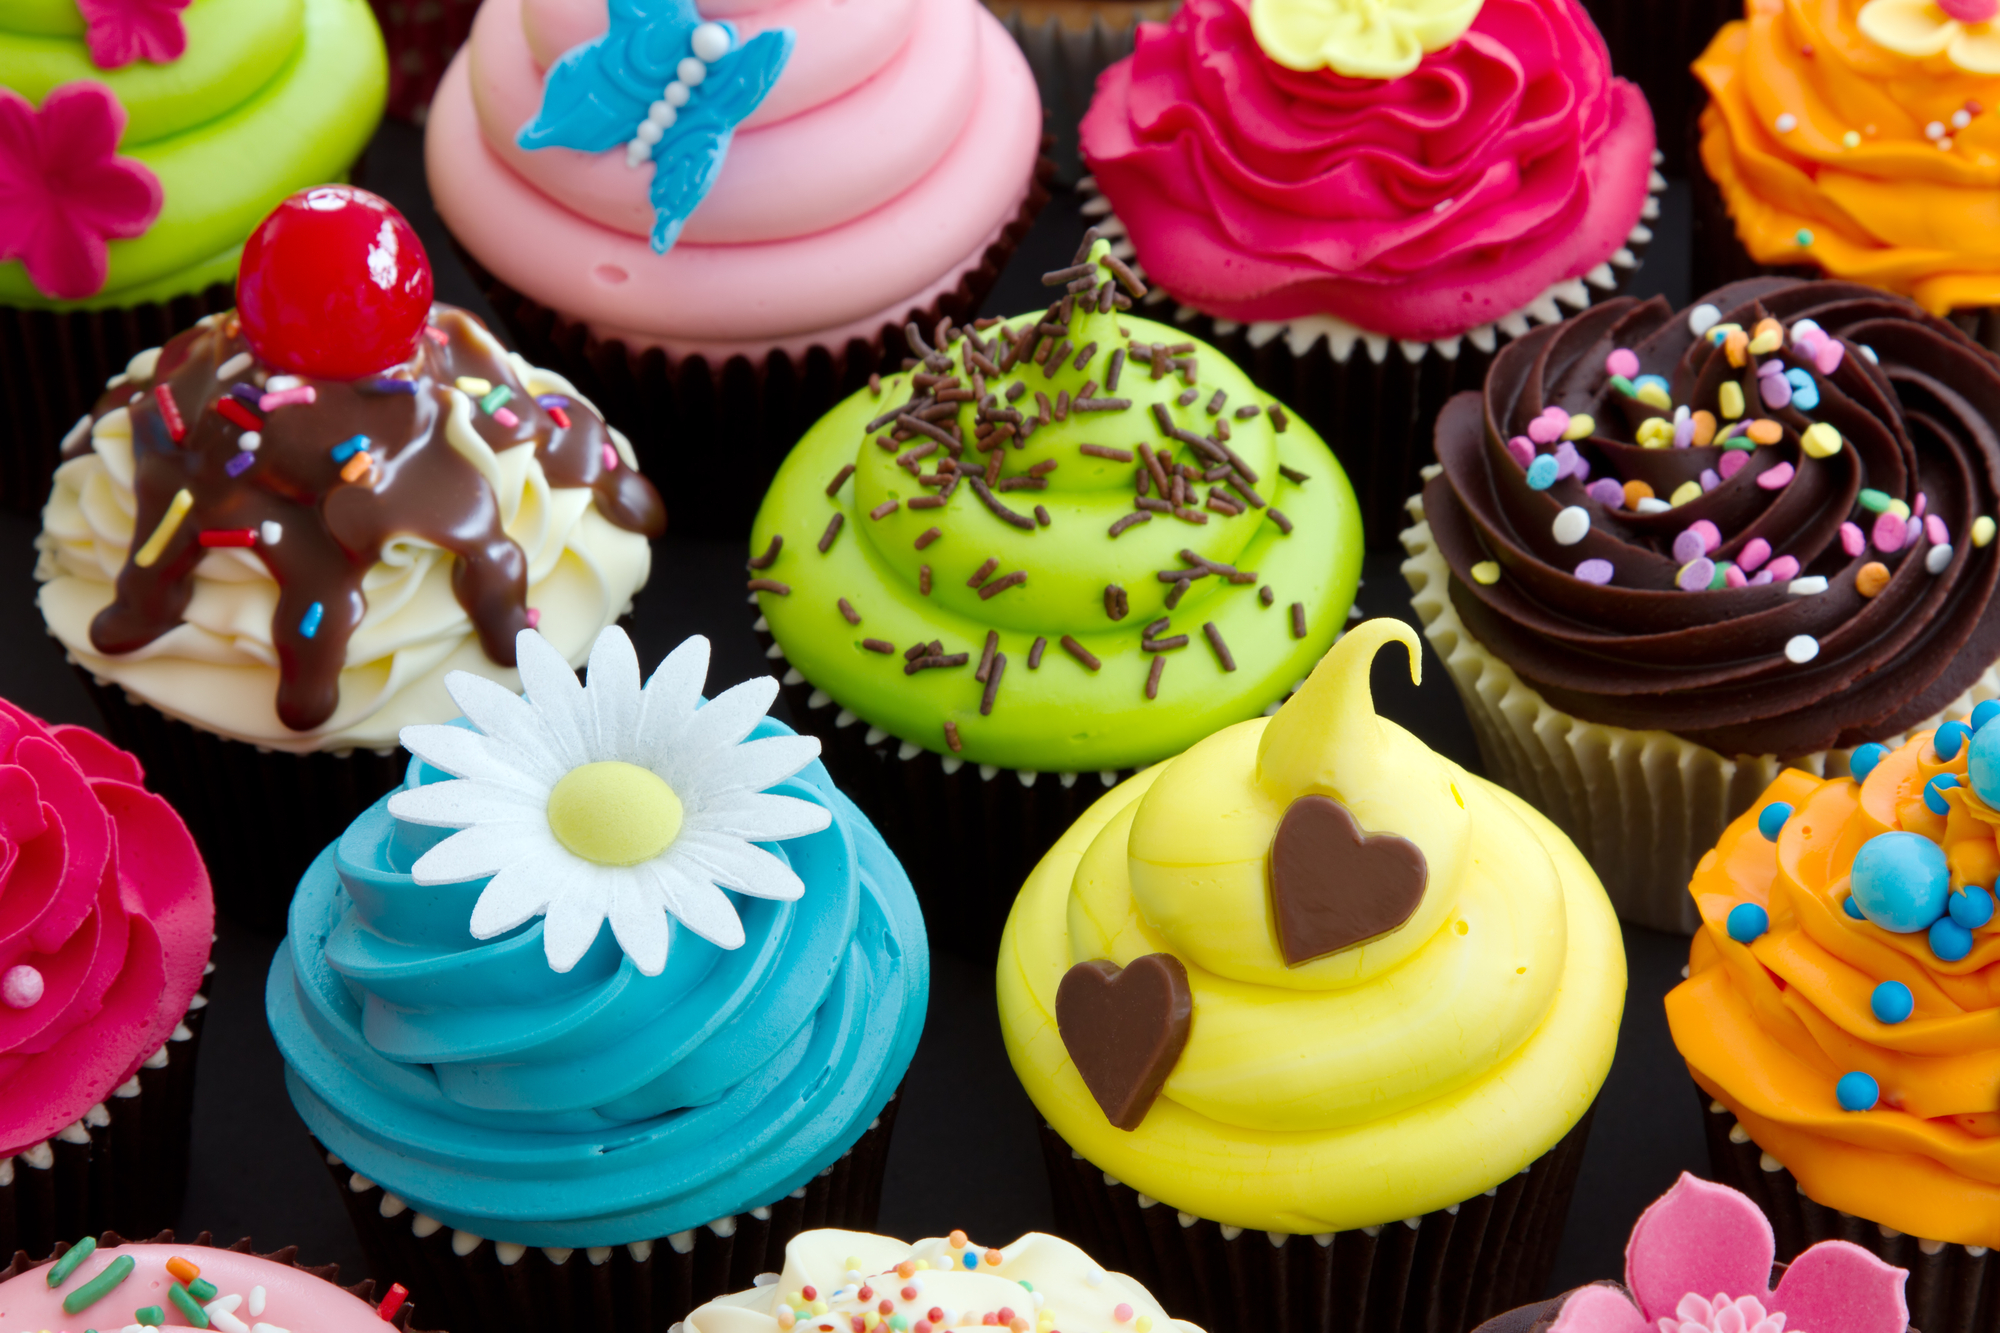 Assortment of brightly decorated cupcakes